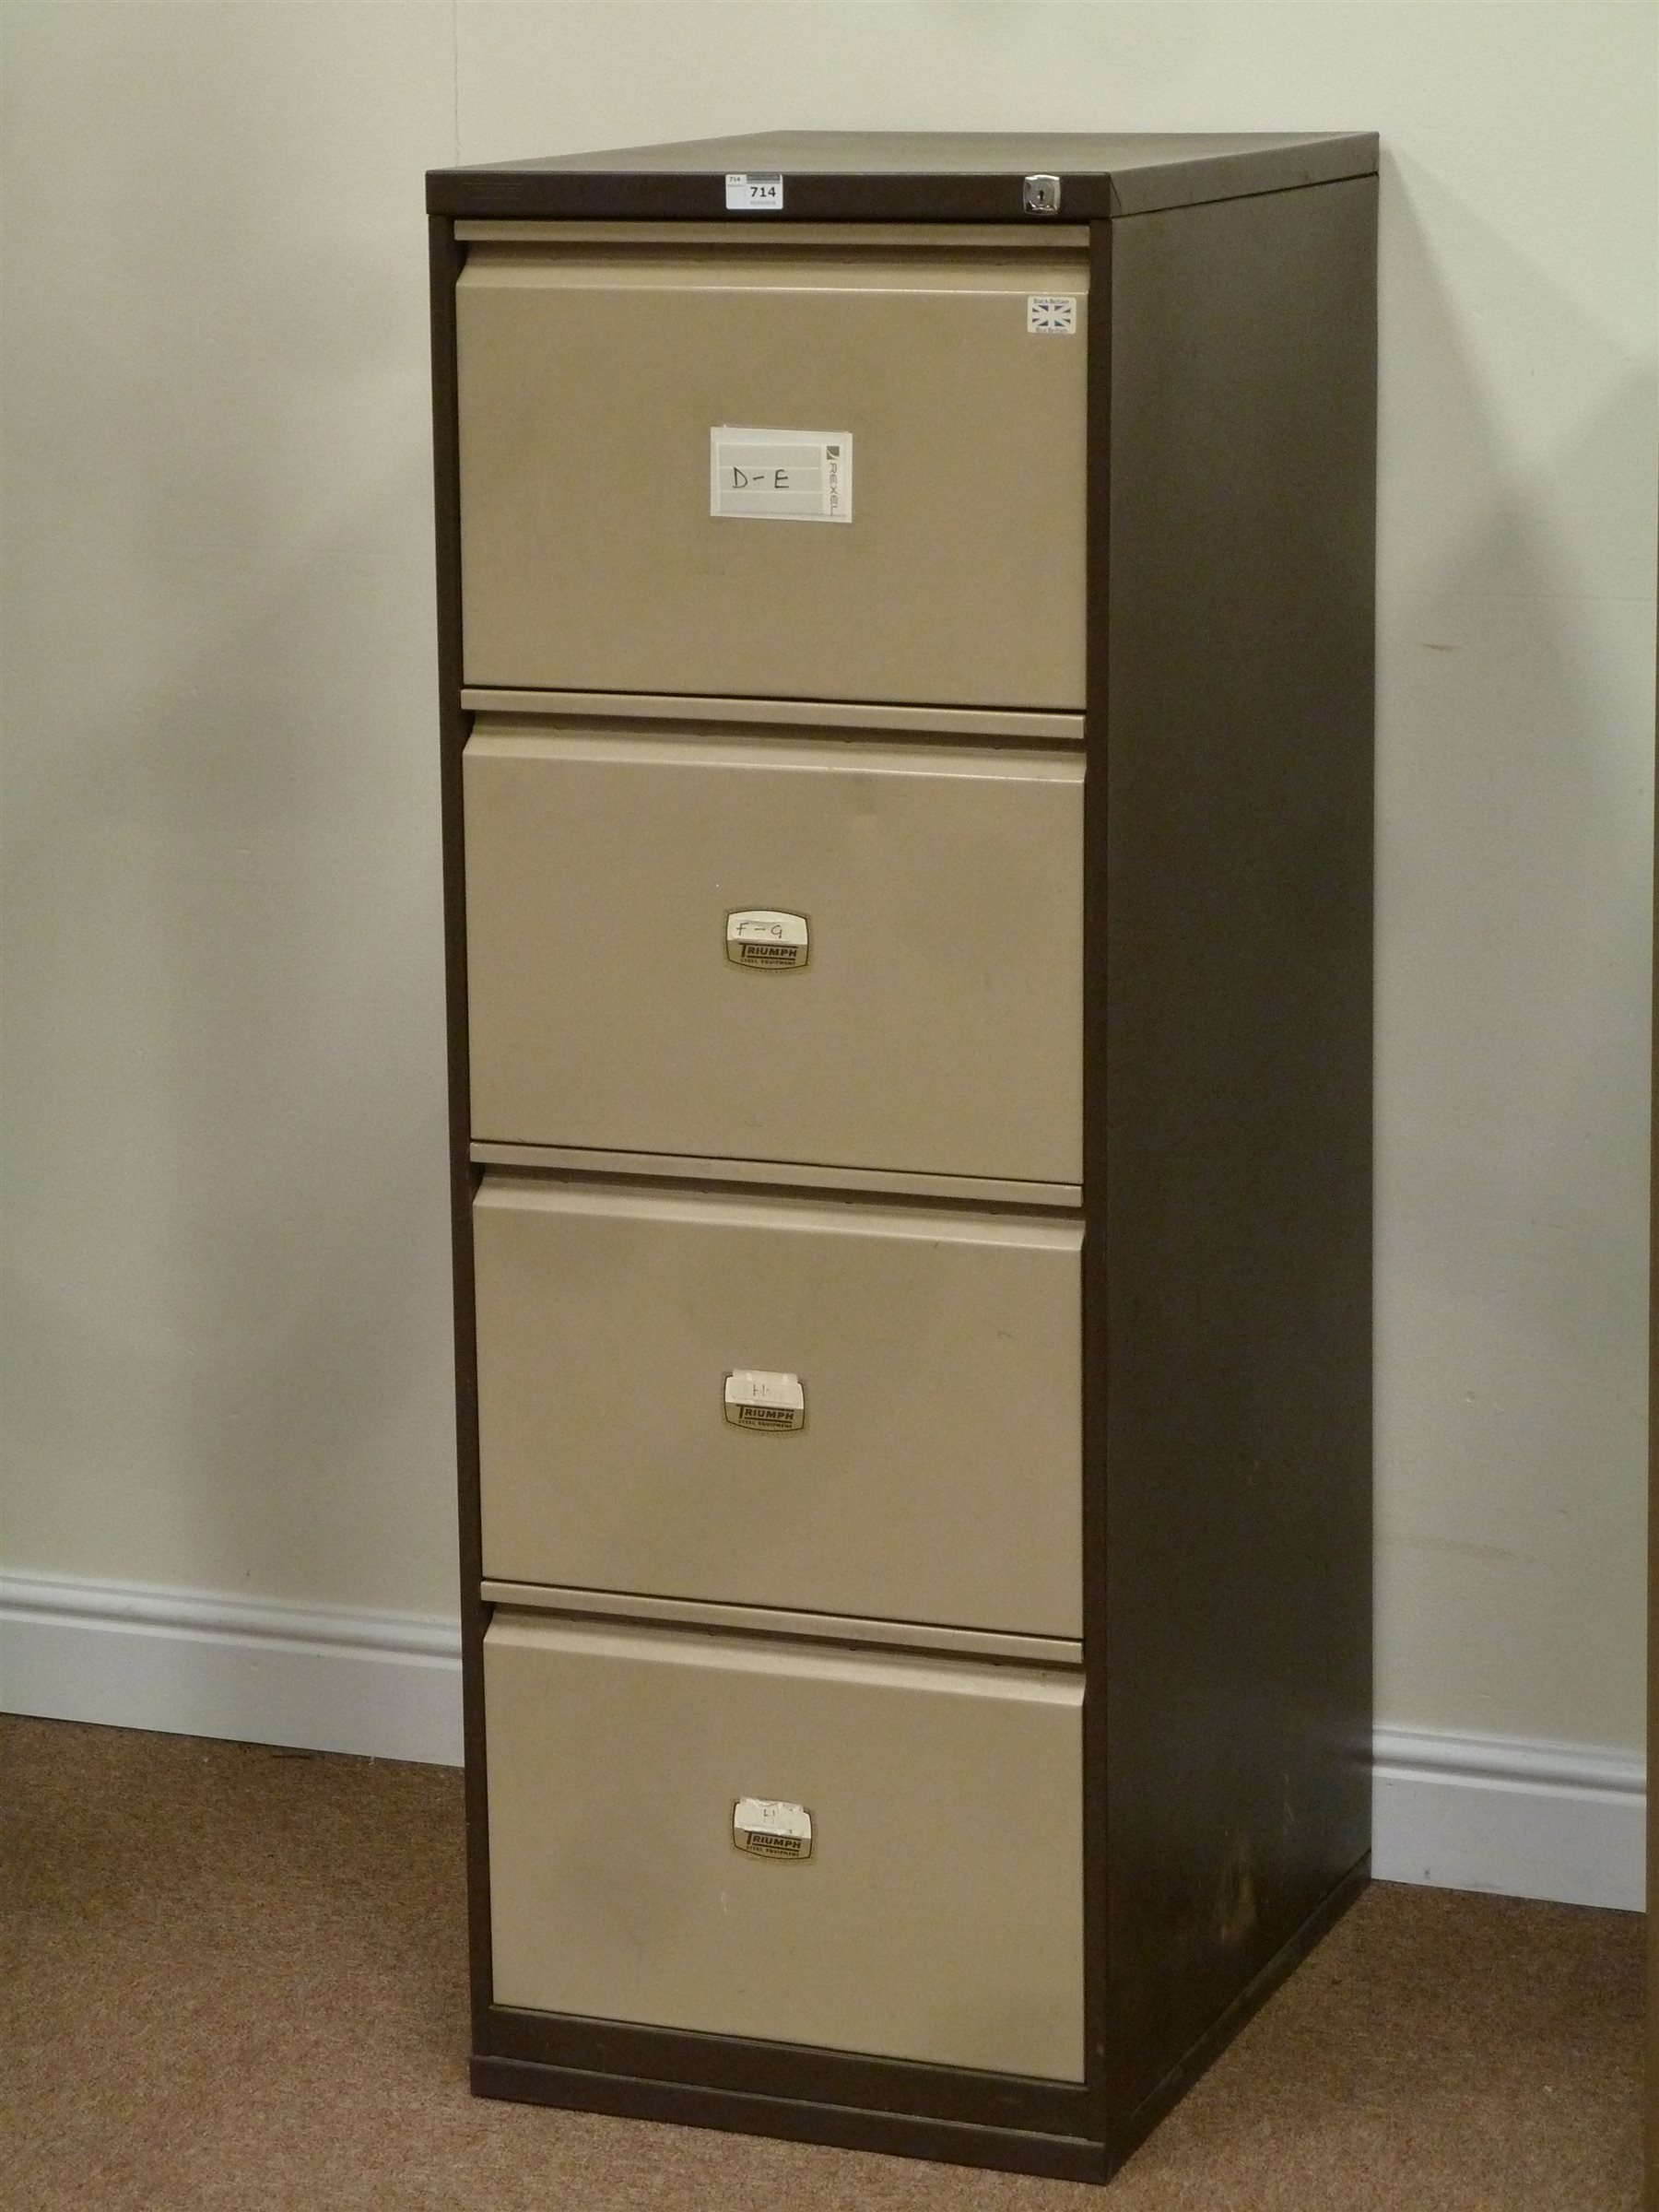 Triumph Four Drawer Filing Cabinet With Key Bisley Four Drawer within sizing 1800 X 2400